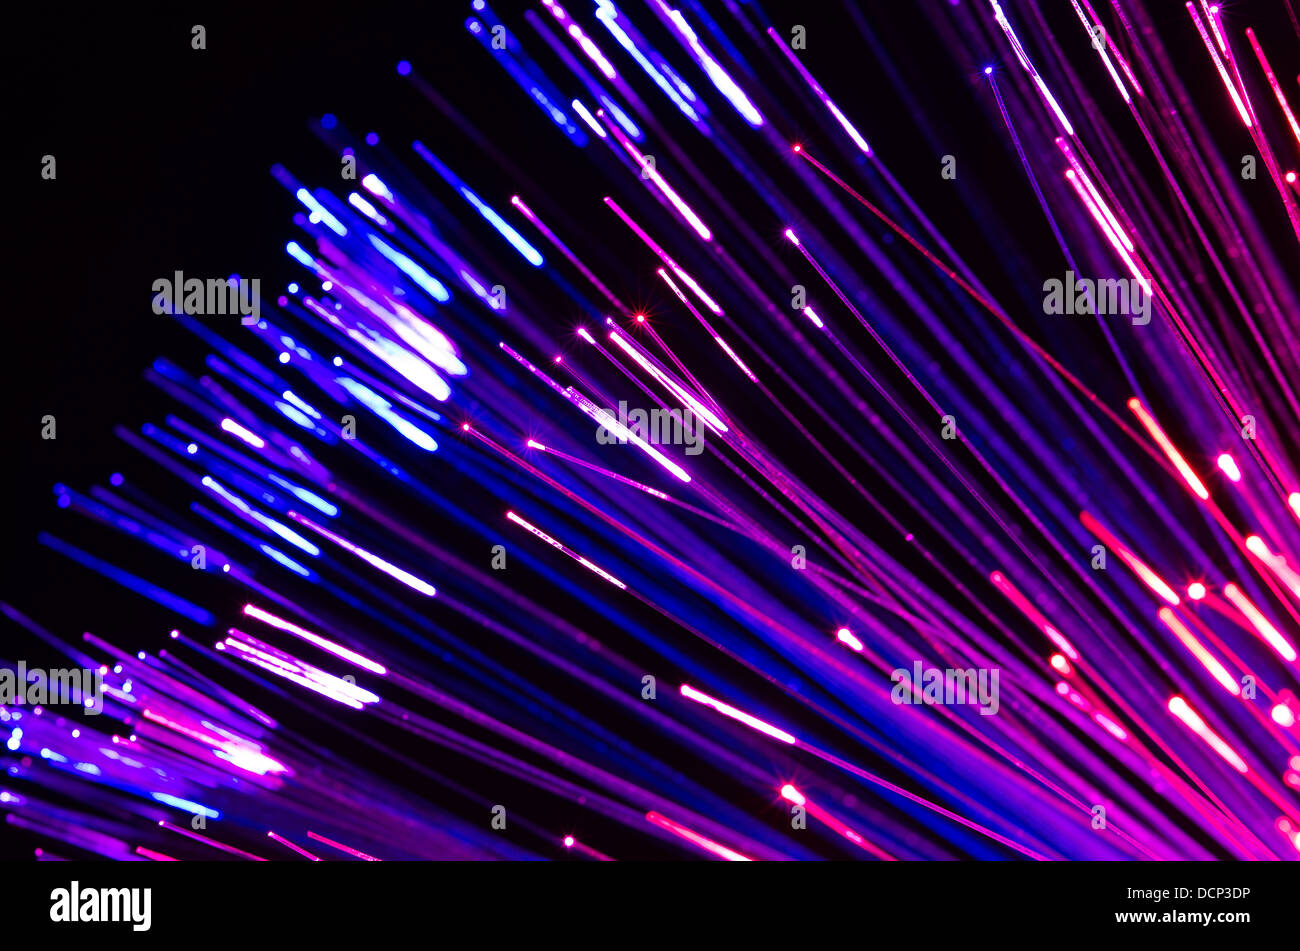 fiber optic light communication cable means of high volume of digital data stream information info Stock Photo